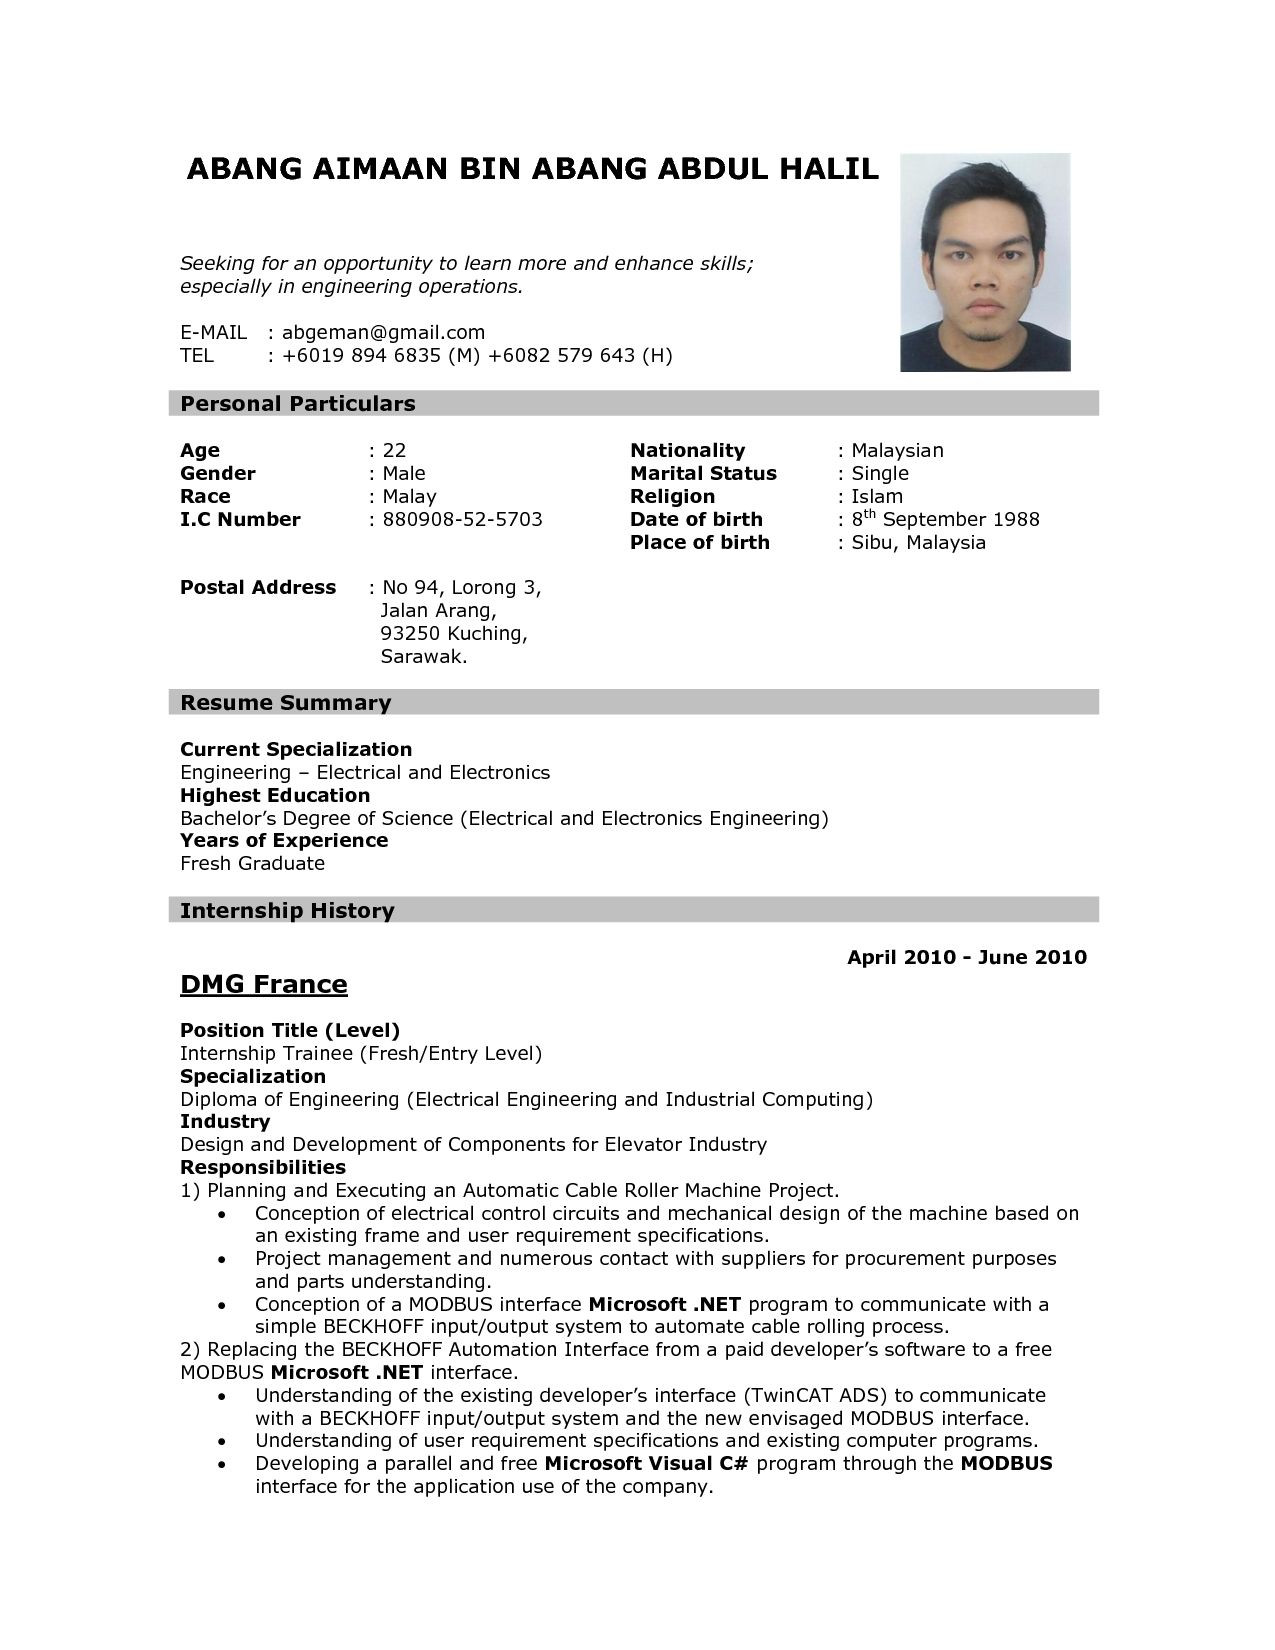 The Best Resume Sample In Malaysia Resume Templates App #resume #resumetemplates #templates Job …